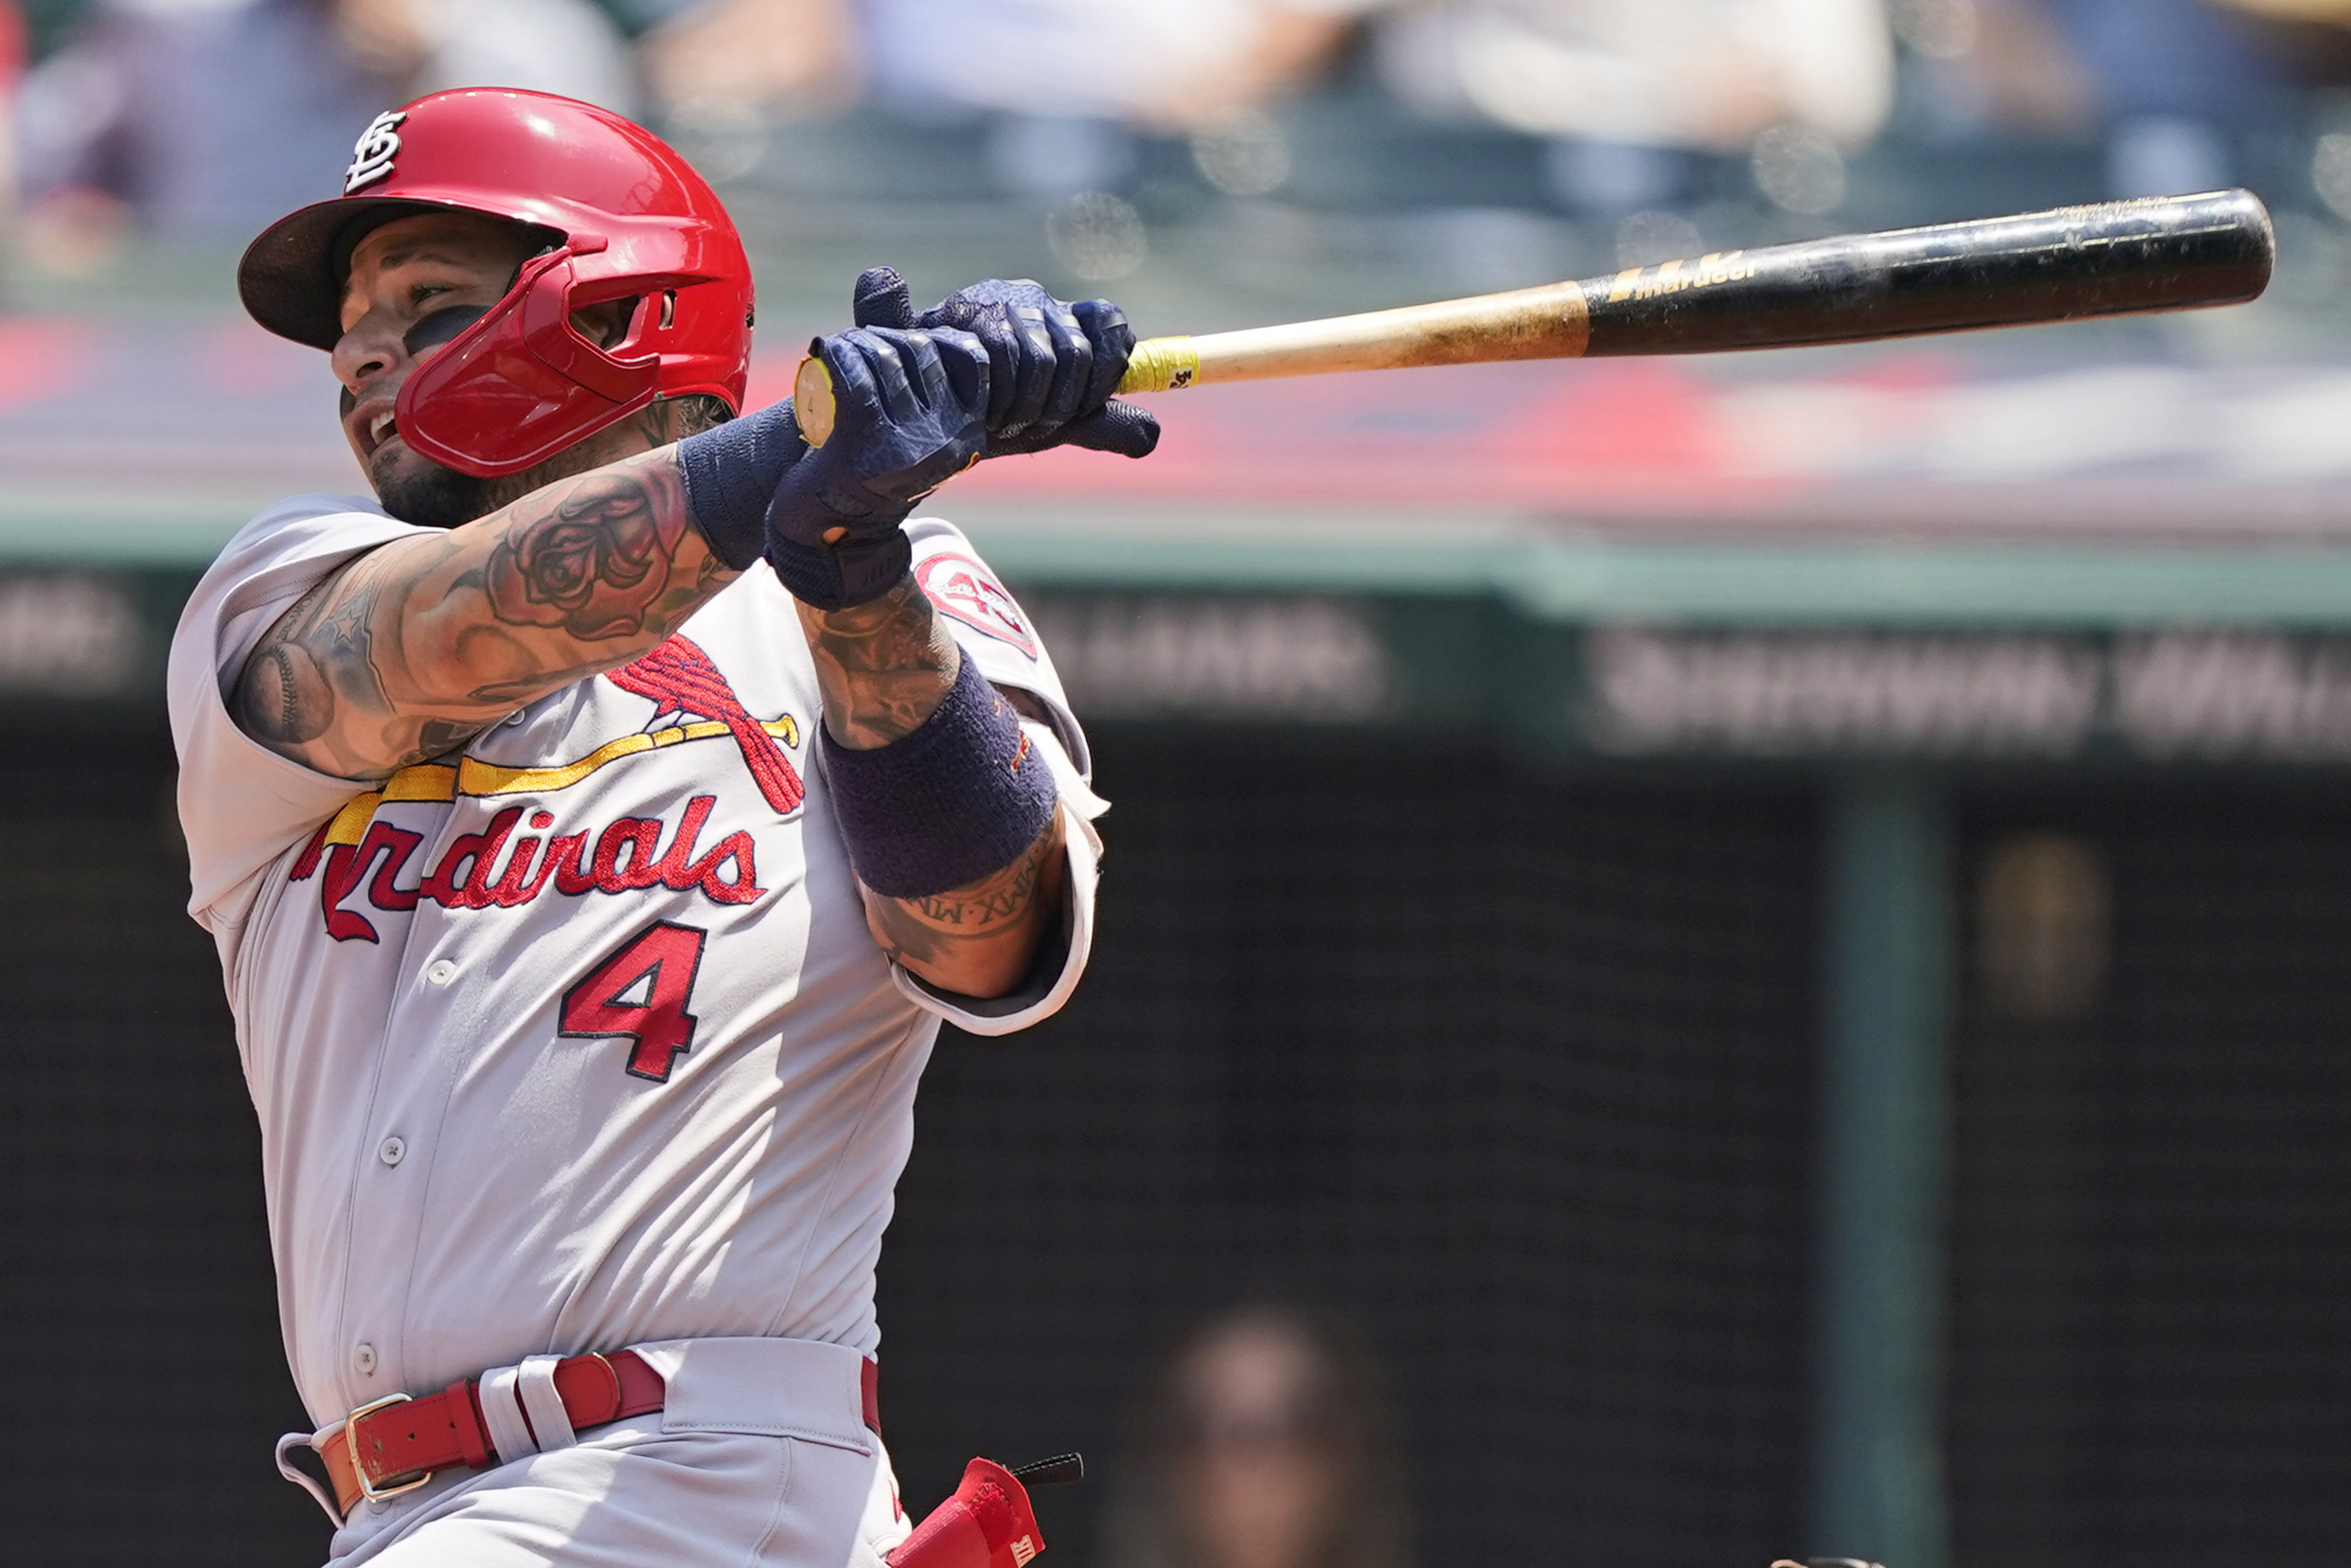 Cardinals' Yadier Molina named to 10th career All-Star team